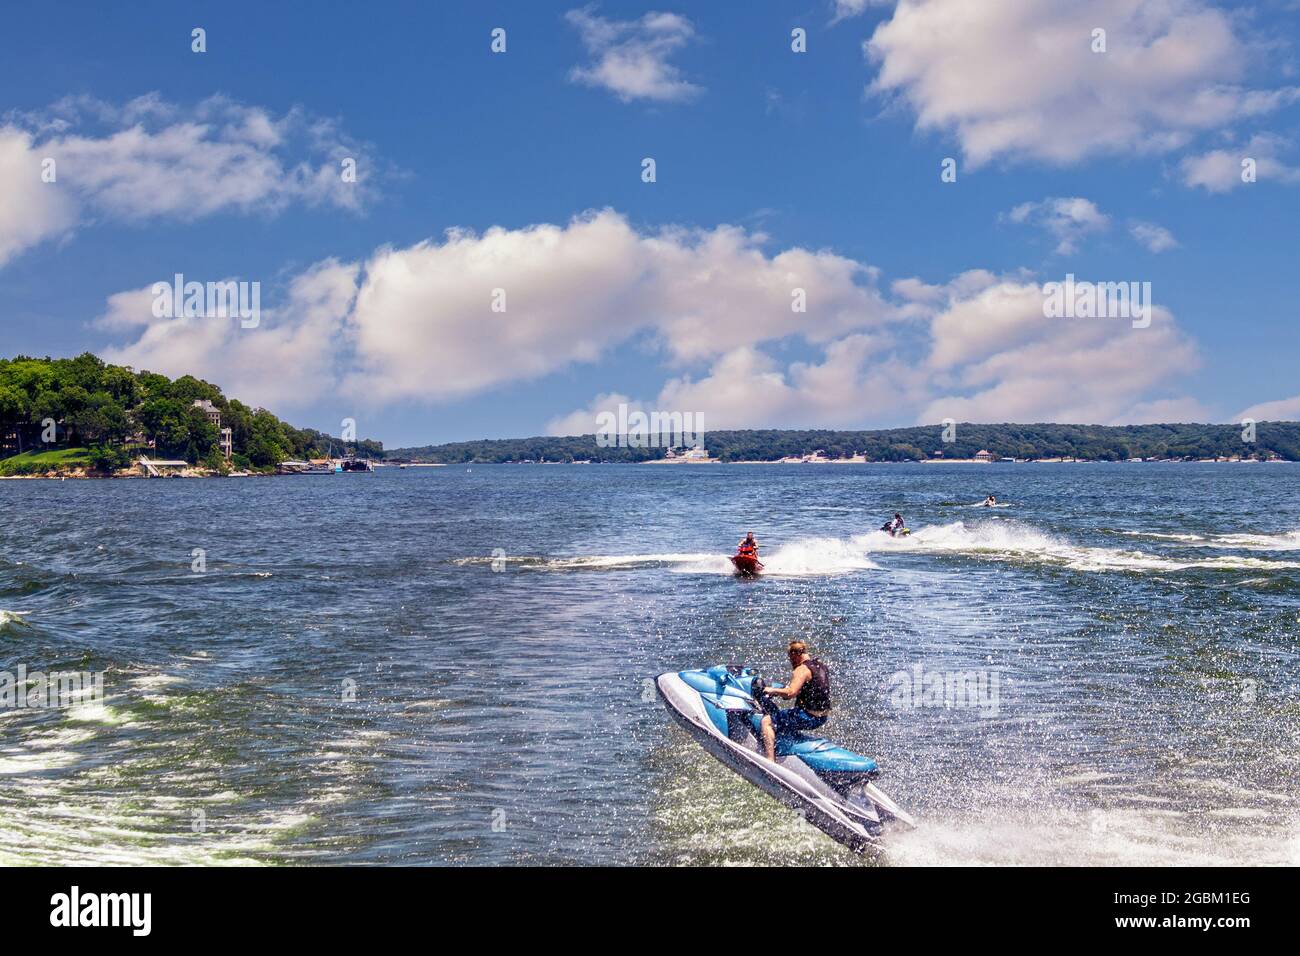 People on Personal watercraft jump wake of boat on lake with homes on shore in the distance. Stock Photo